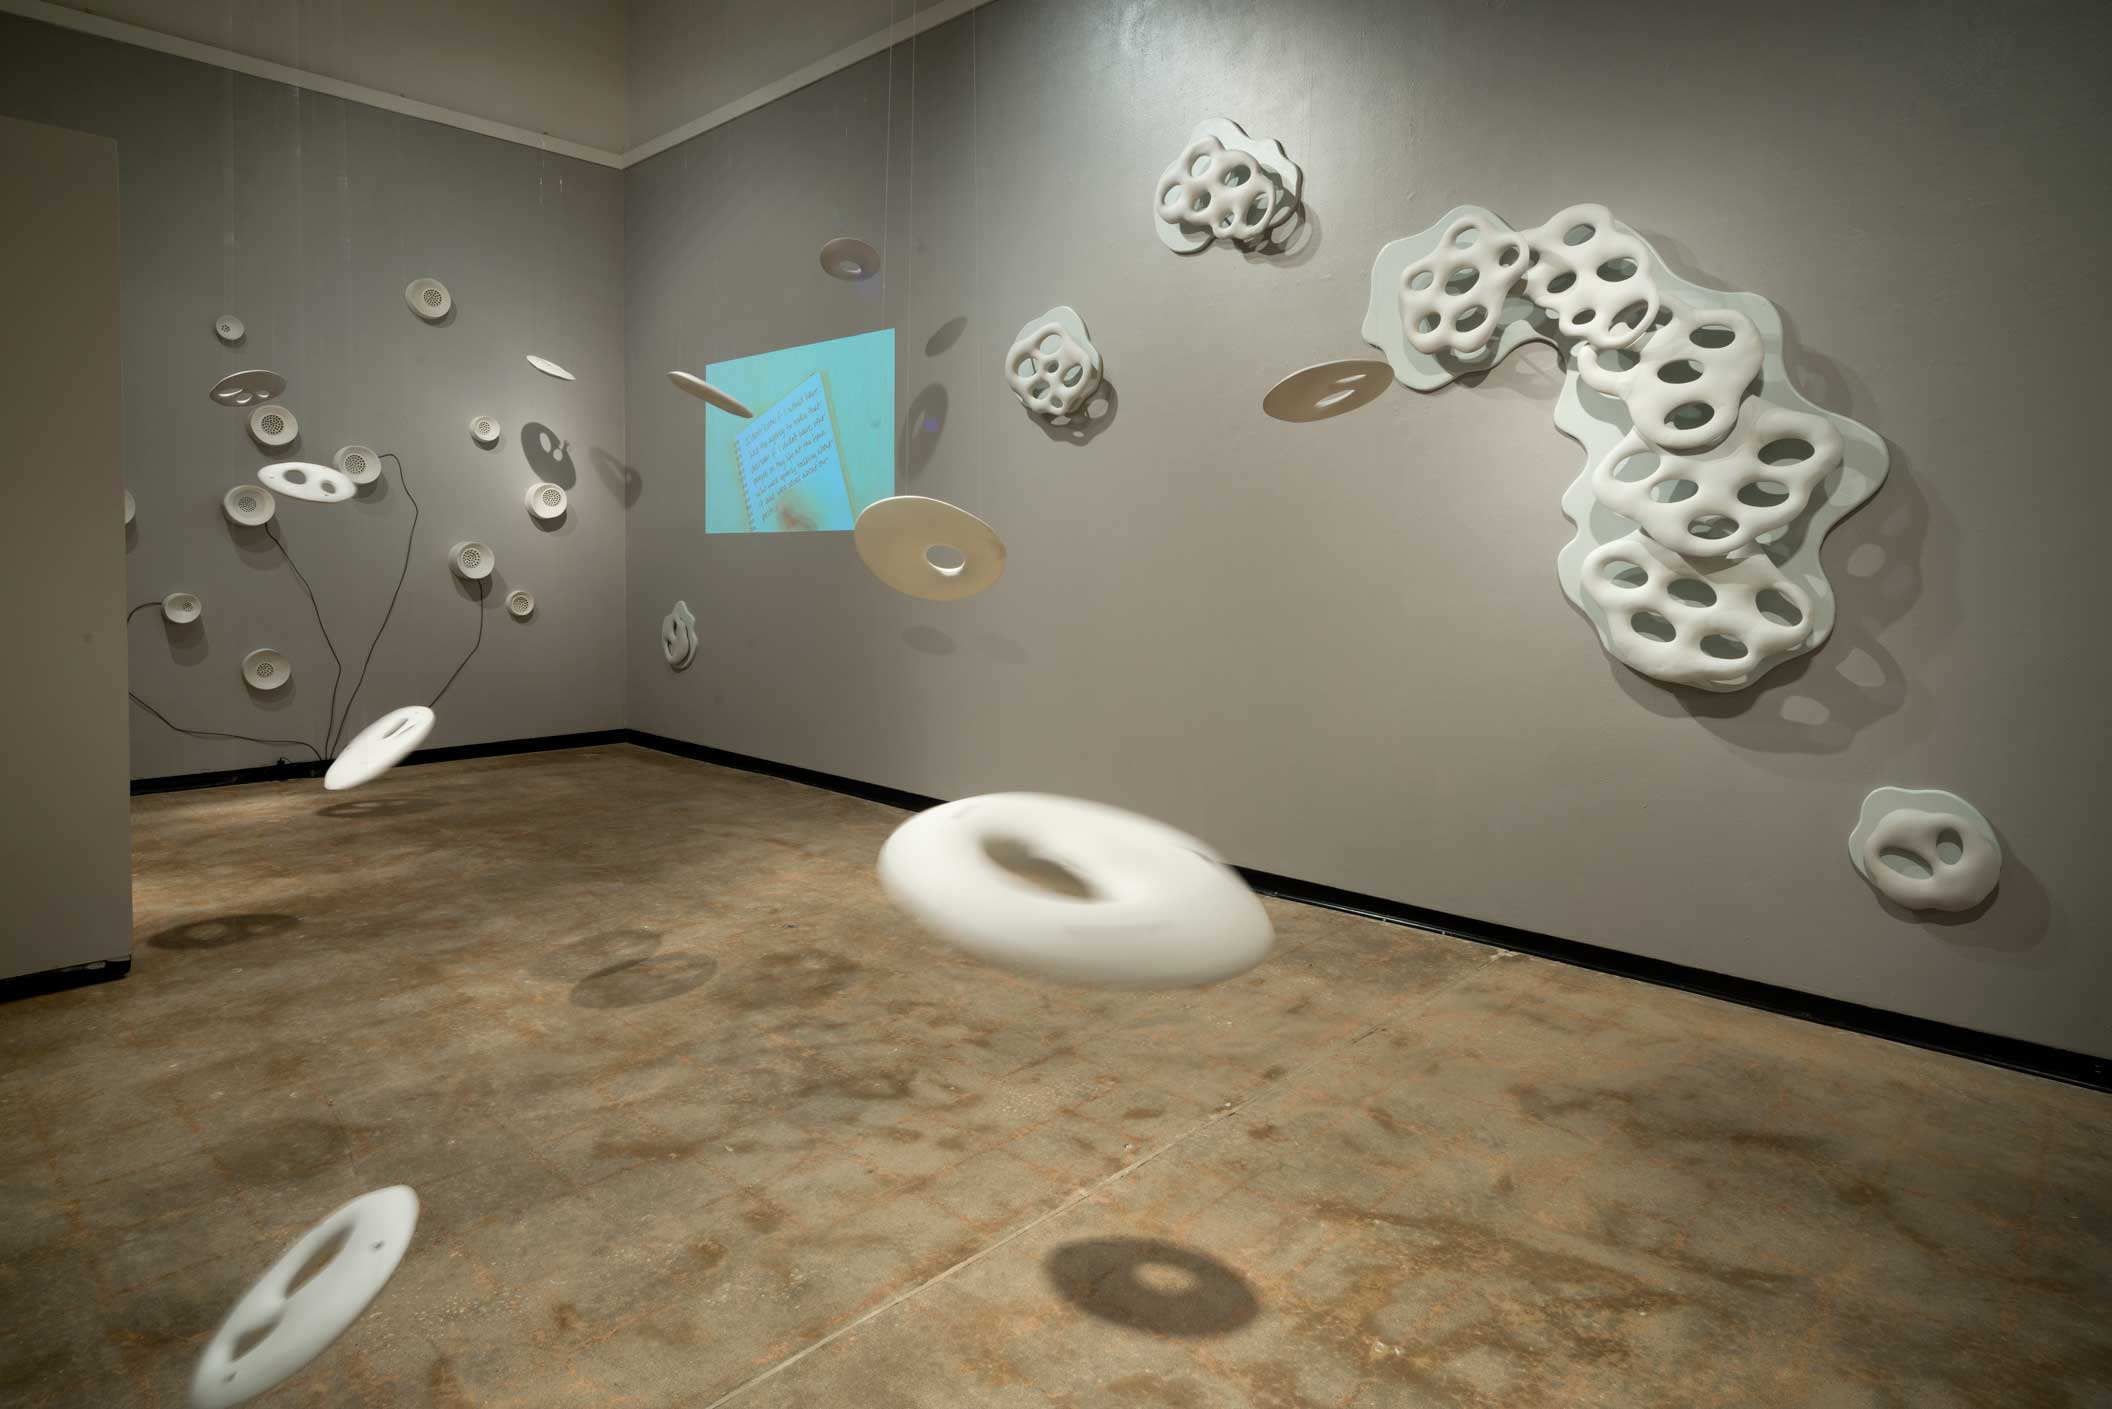 Nicole Gugliotti. Awe/Agency, 2014. Porcelain, Stoneware, wood, paint, video projection, audio, monofilament. Full installation, 10 x 25 x 14 ft. Photo by Allen Cheuvront.